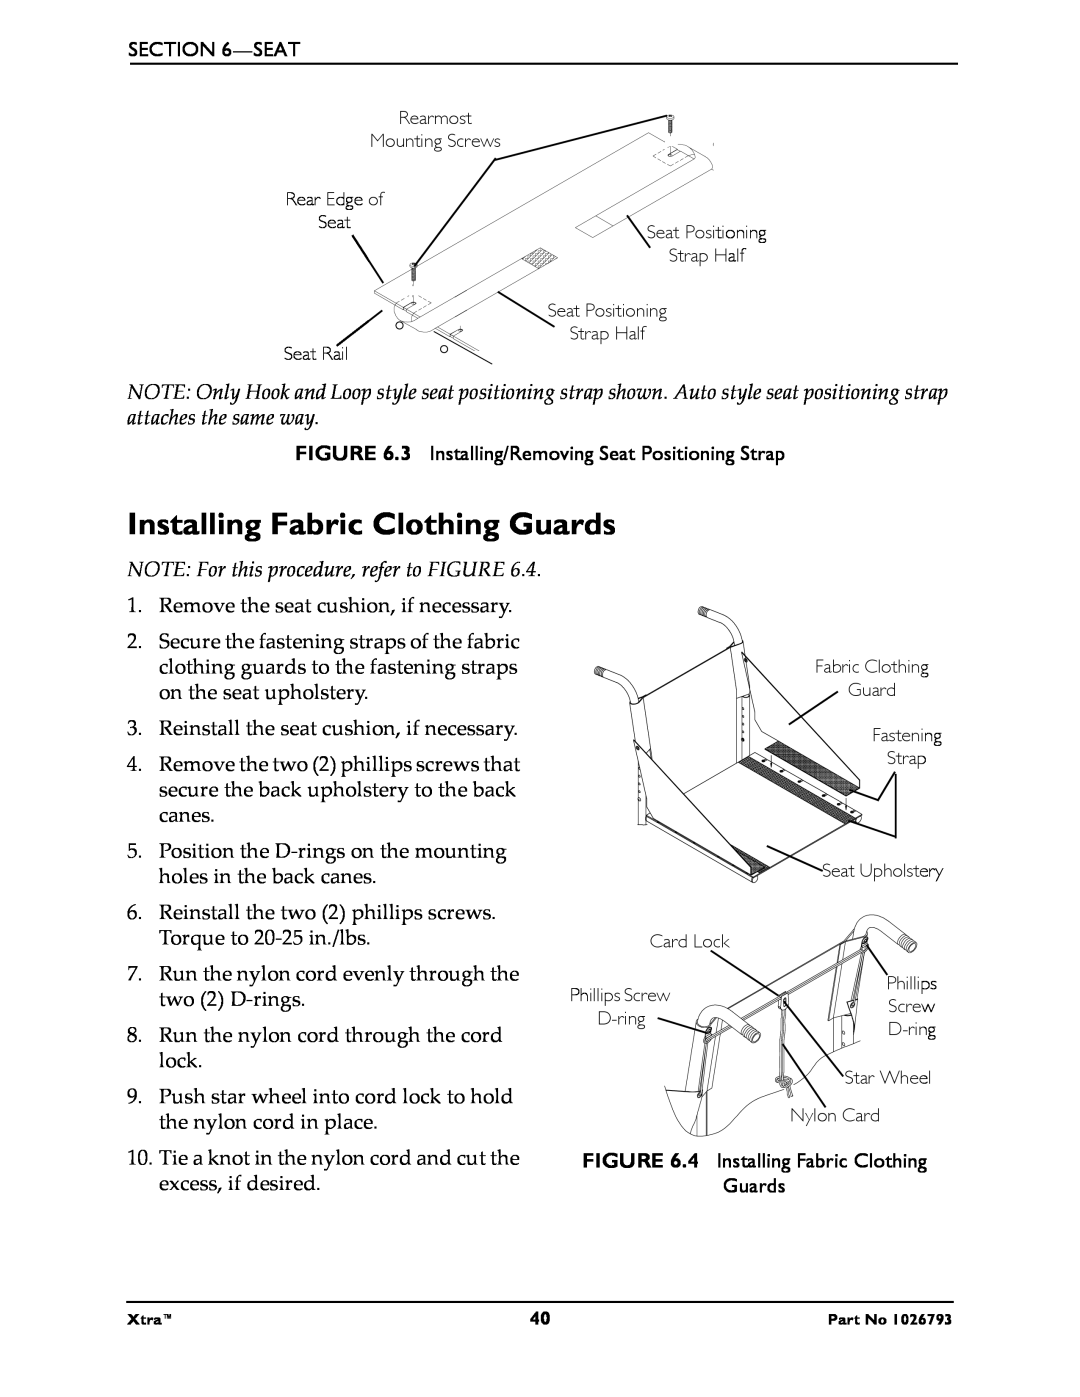 Invacare 1026793 manual Installing Fabric Clothing Guards, NOTE For this procedure, refer to FIGURE 